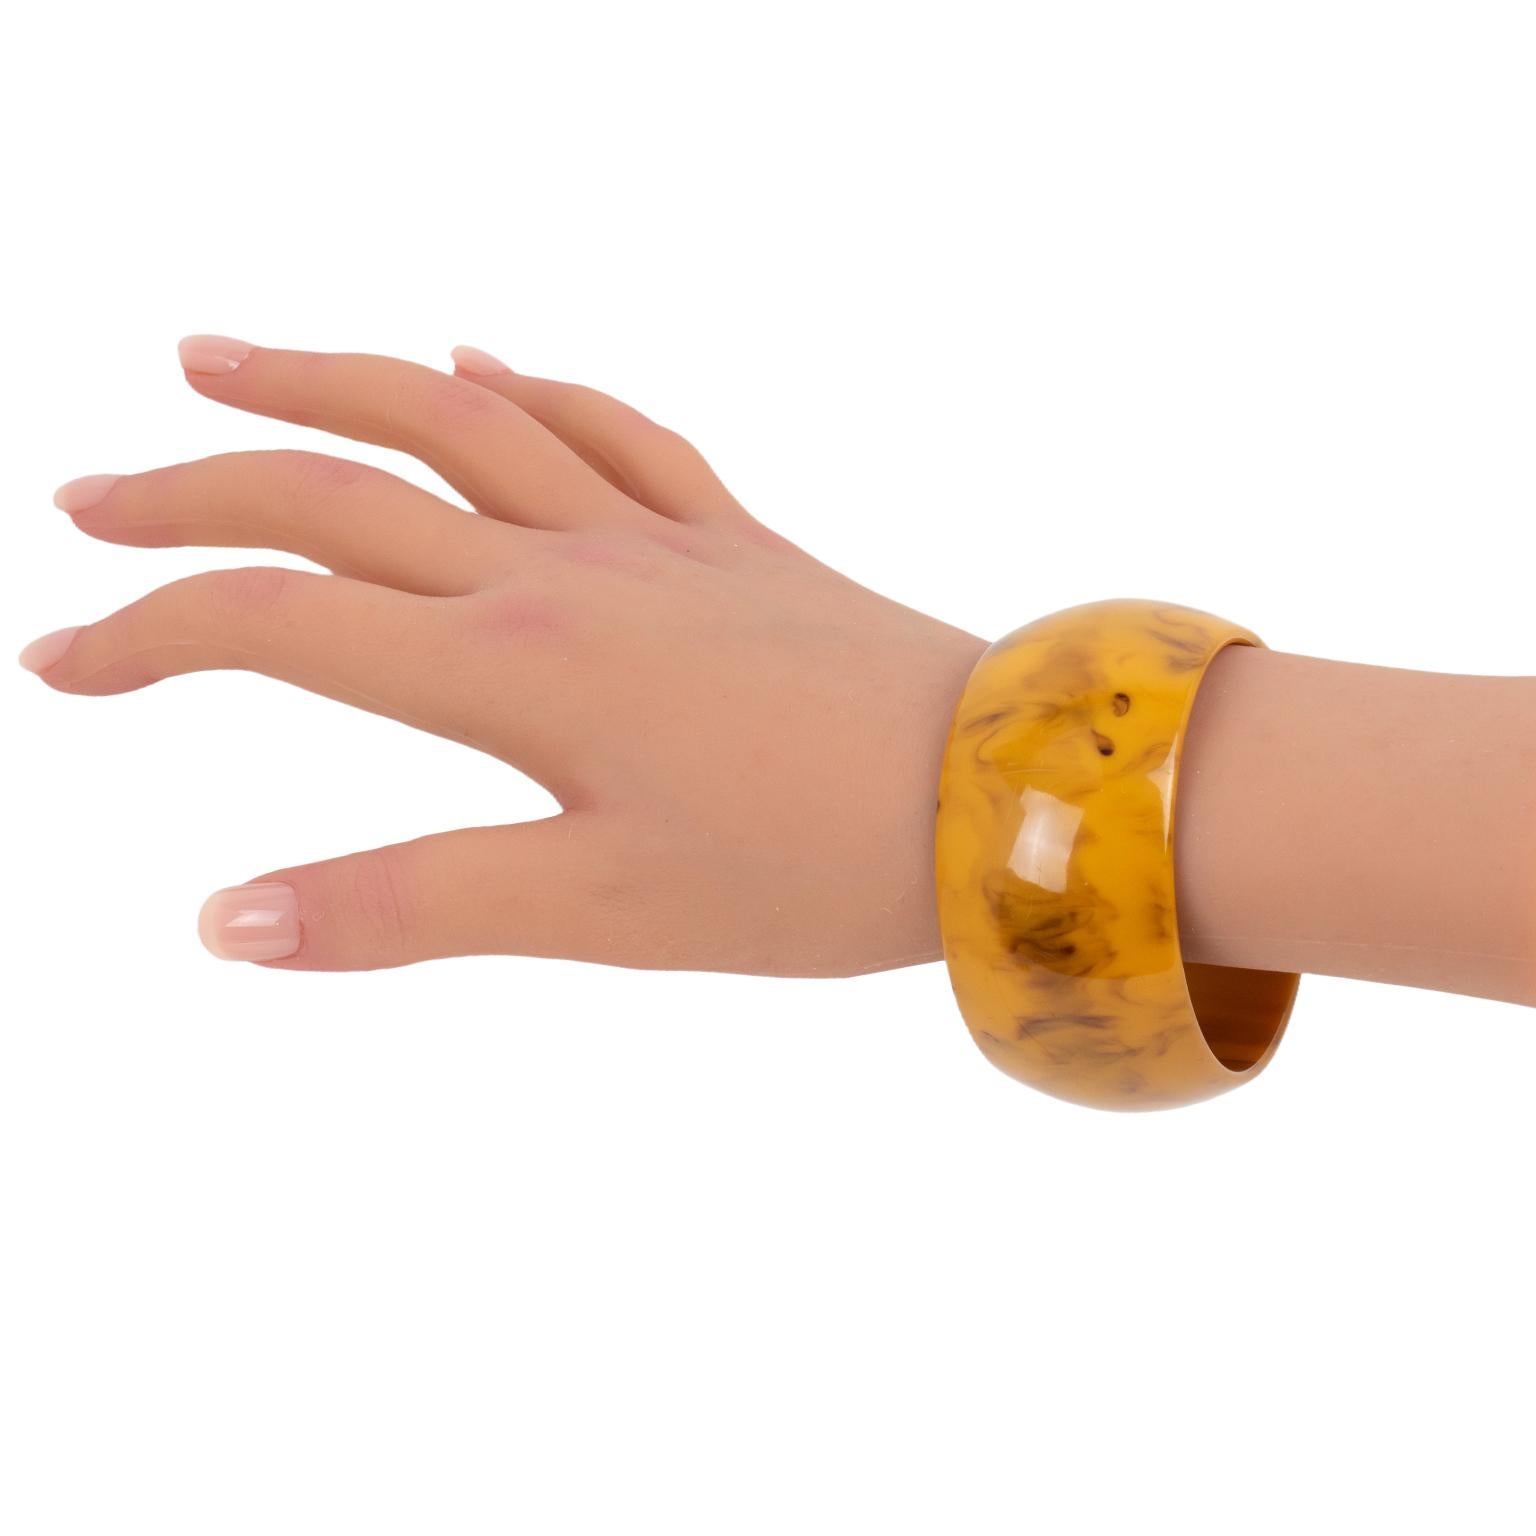 Bakelite Oversized Bracelet Bangle Butterscotch and Black Marble In Excellent Condition For Sale In Atlanta, GA